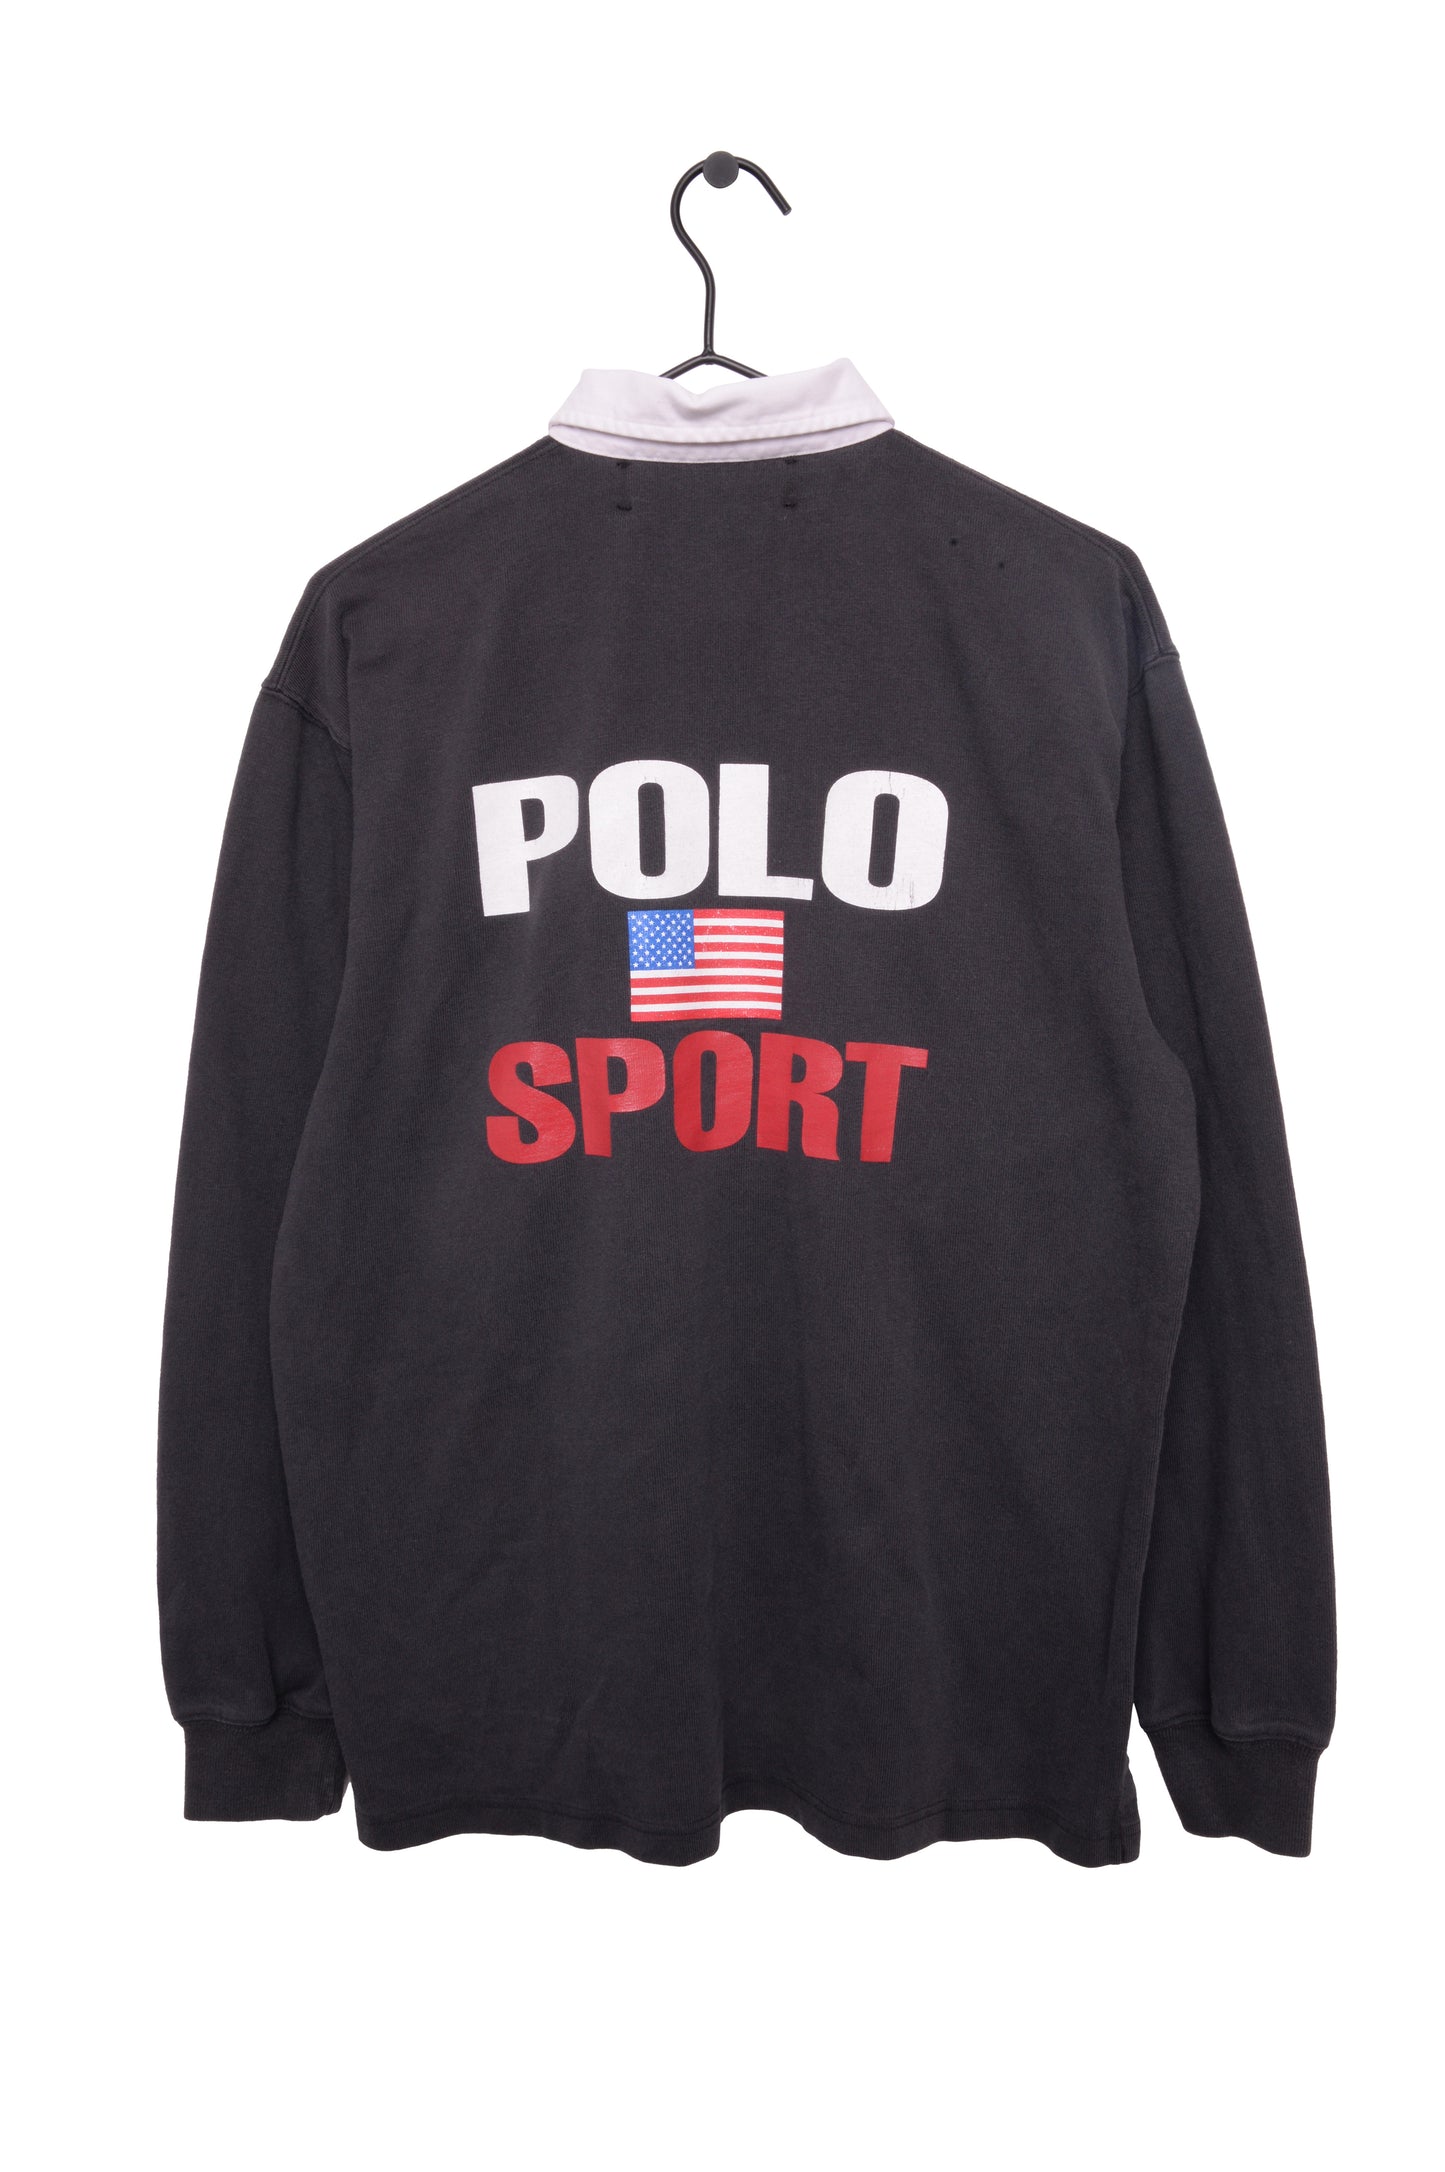 1990s Polo Sport Rugby Shirt